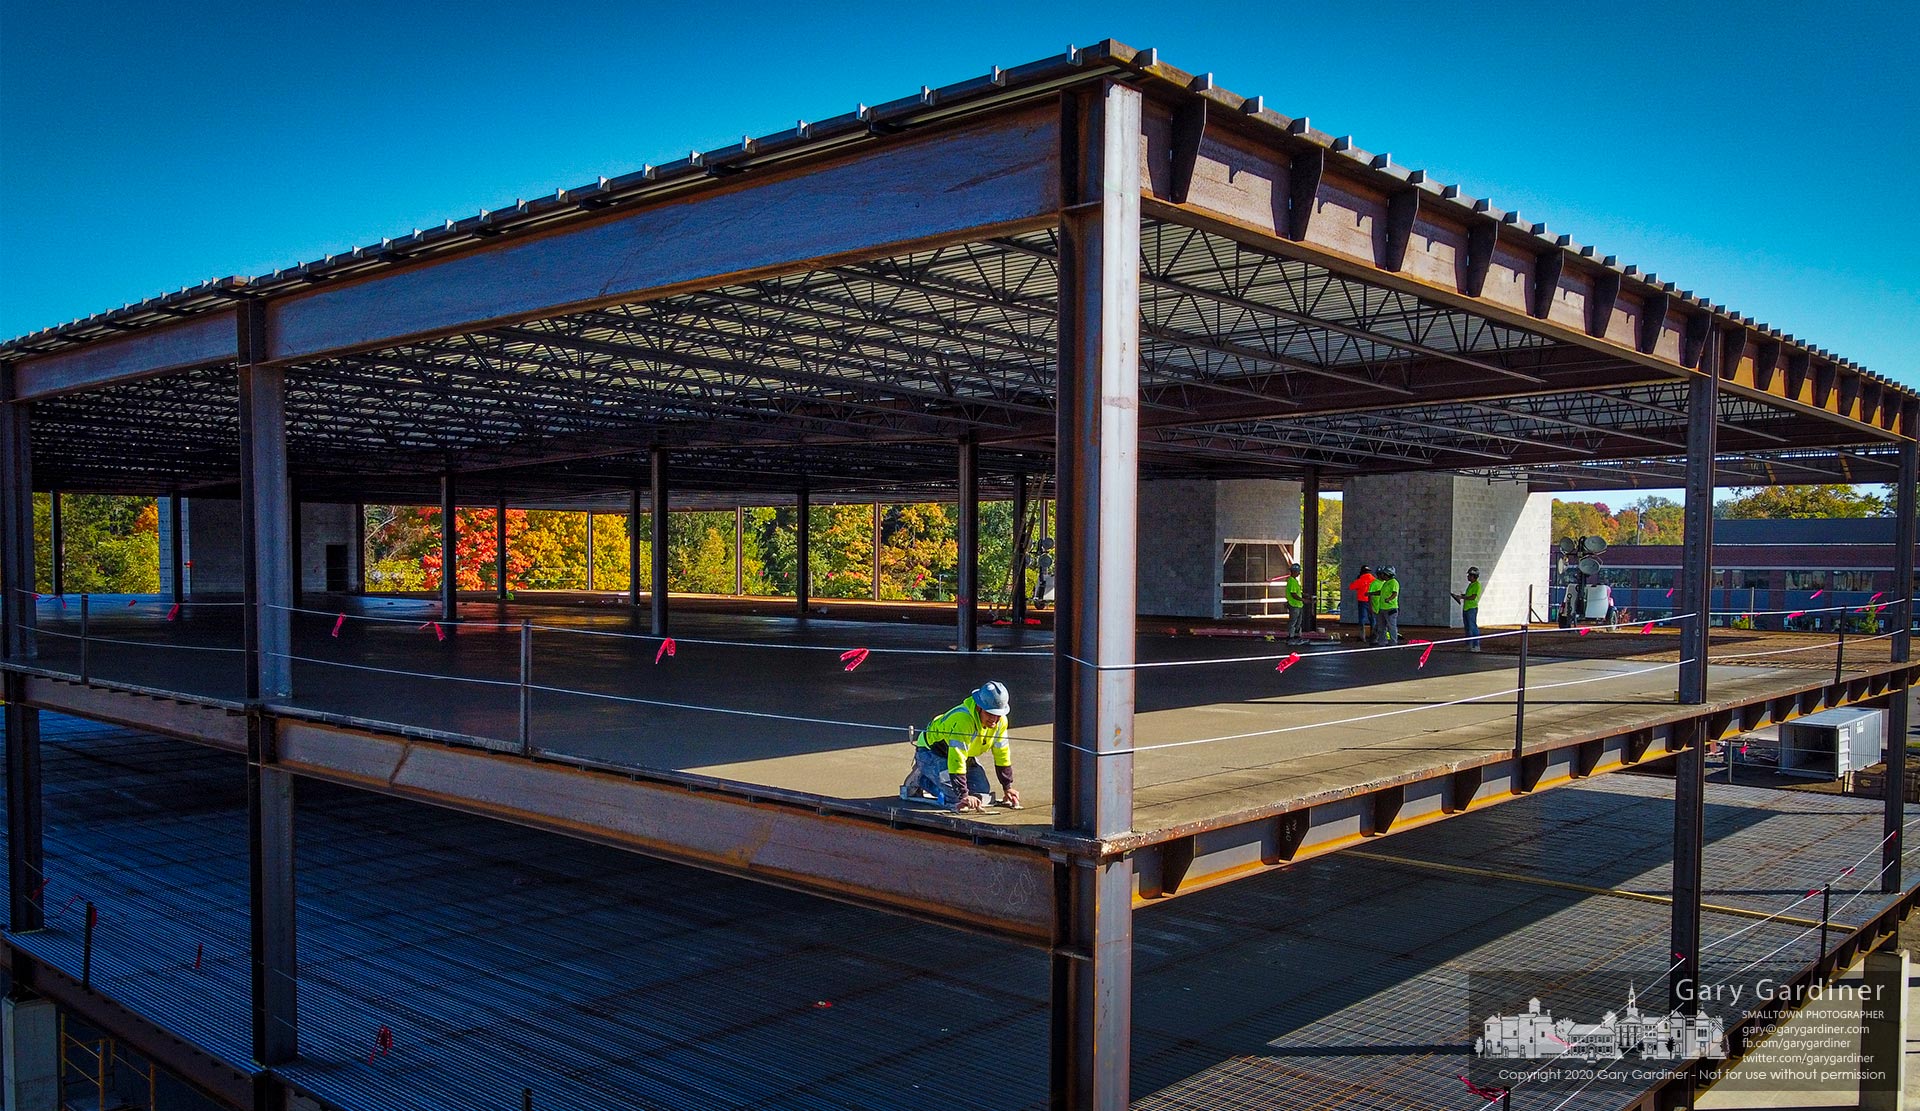 A construction worker smooths out the edges of a concrete pad poured for the third level floor of the COPC medical building under construction off Africa Road. My Final Photo for Oct. 8, 2020.